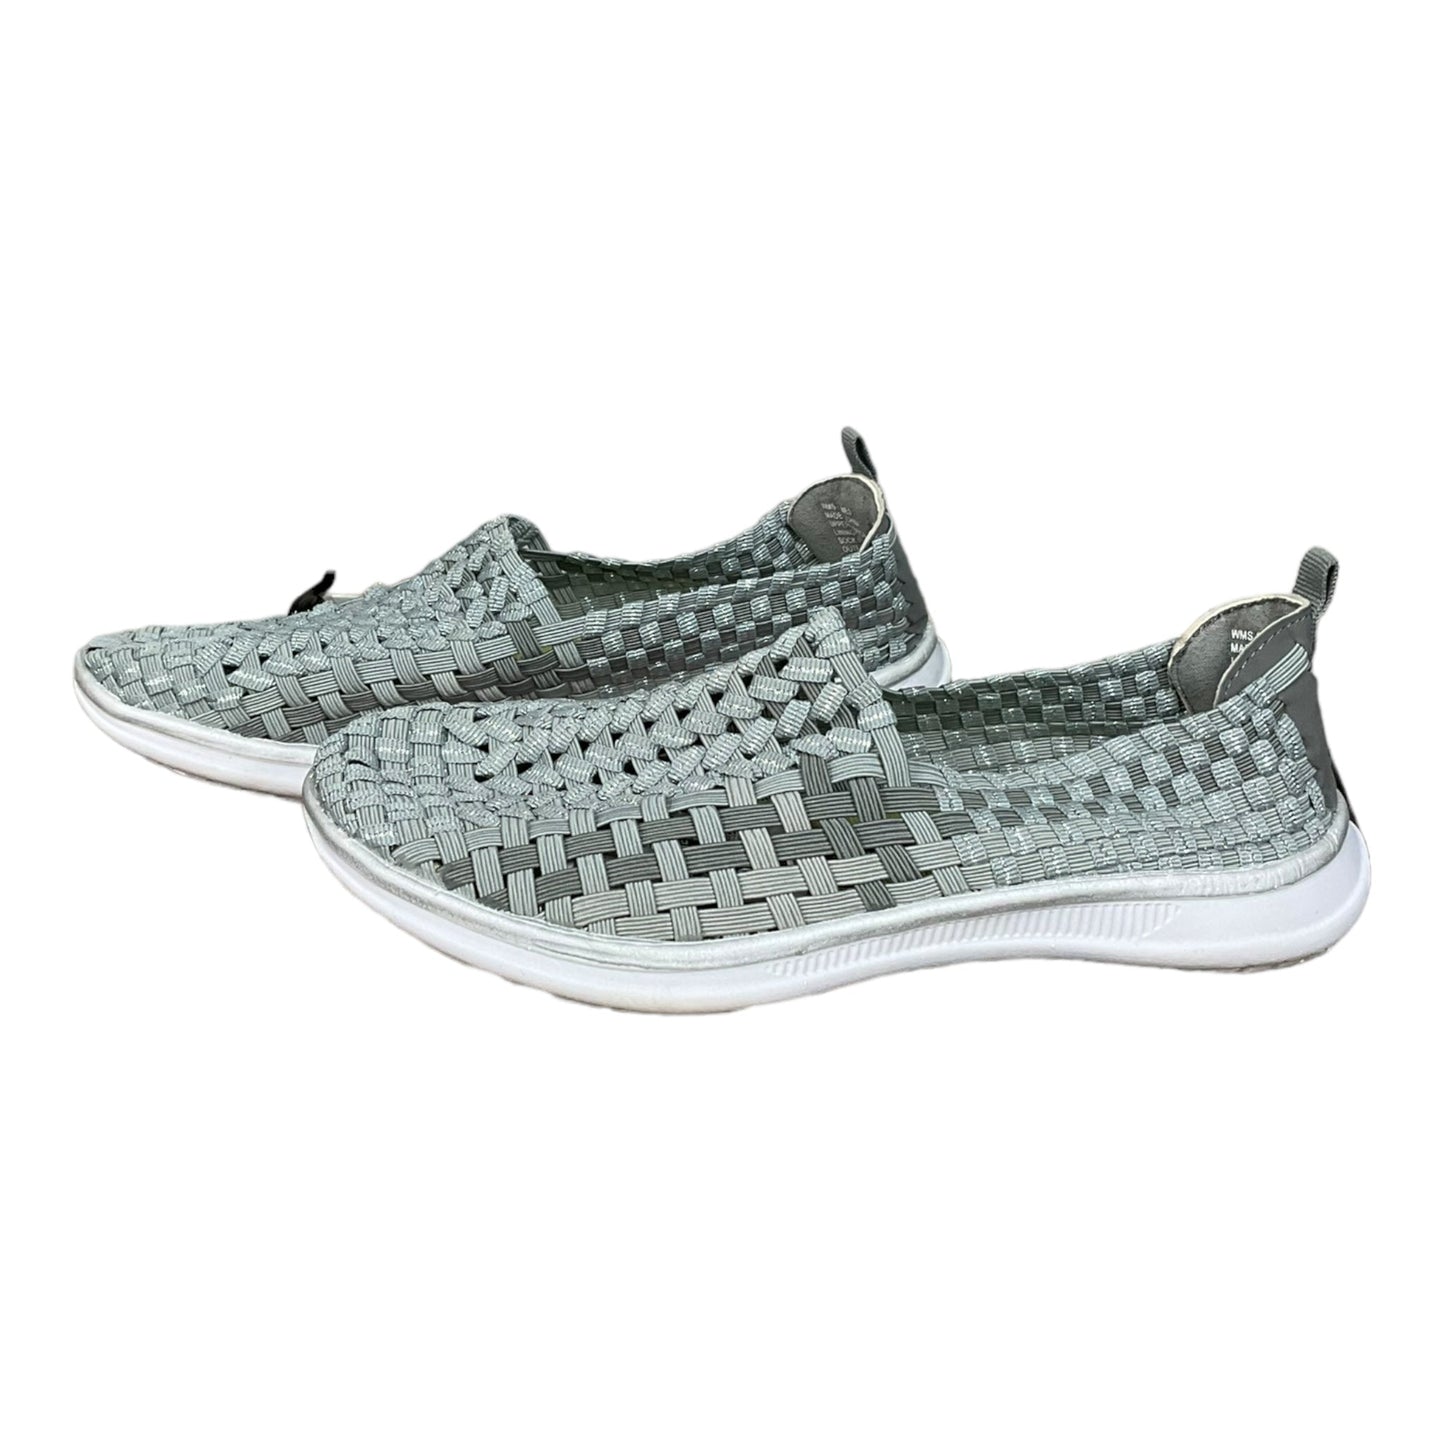 Grey Shoes Athletic Croft And Barrow, Size 8